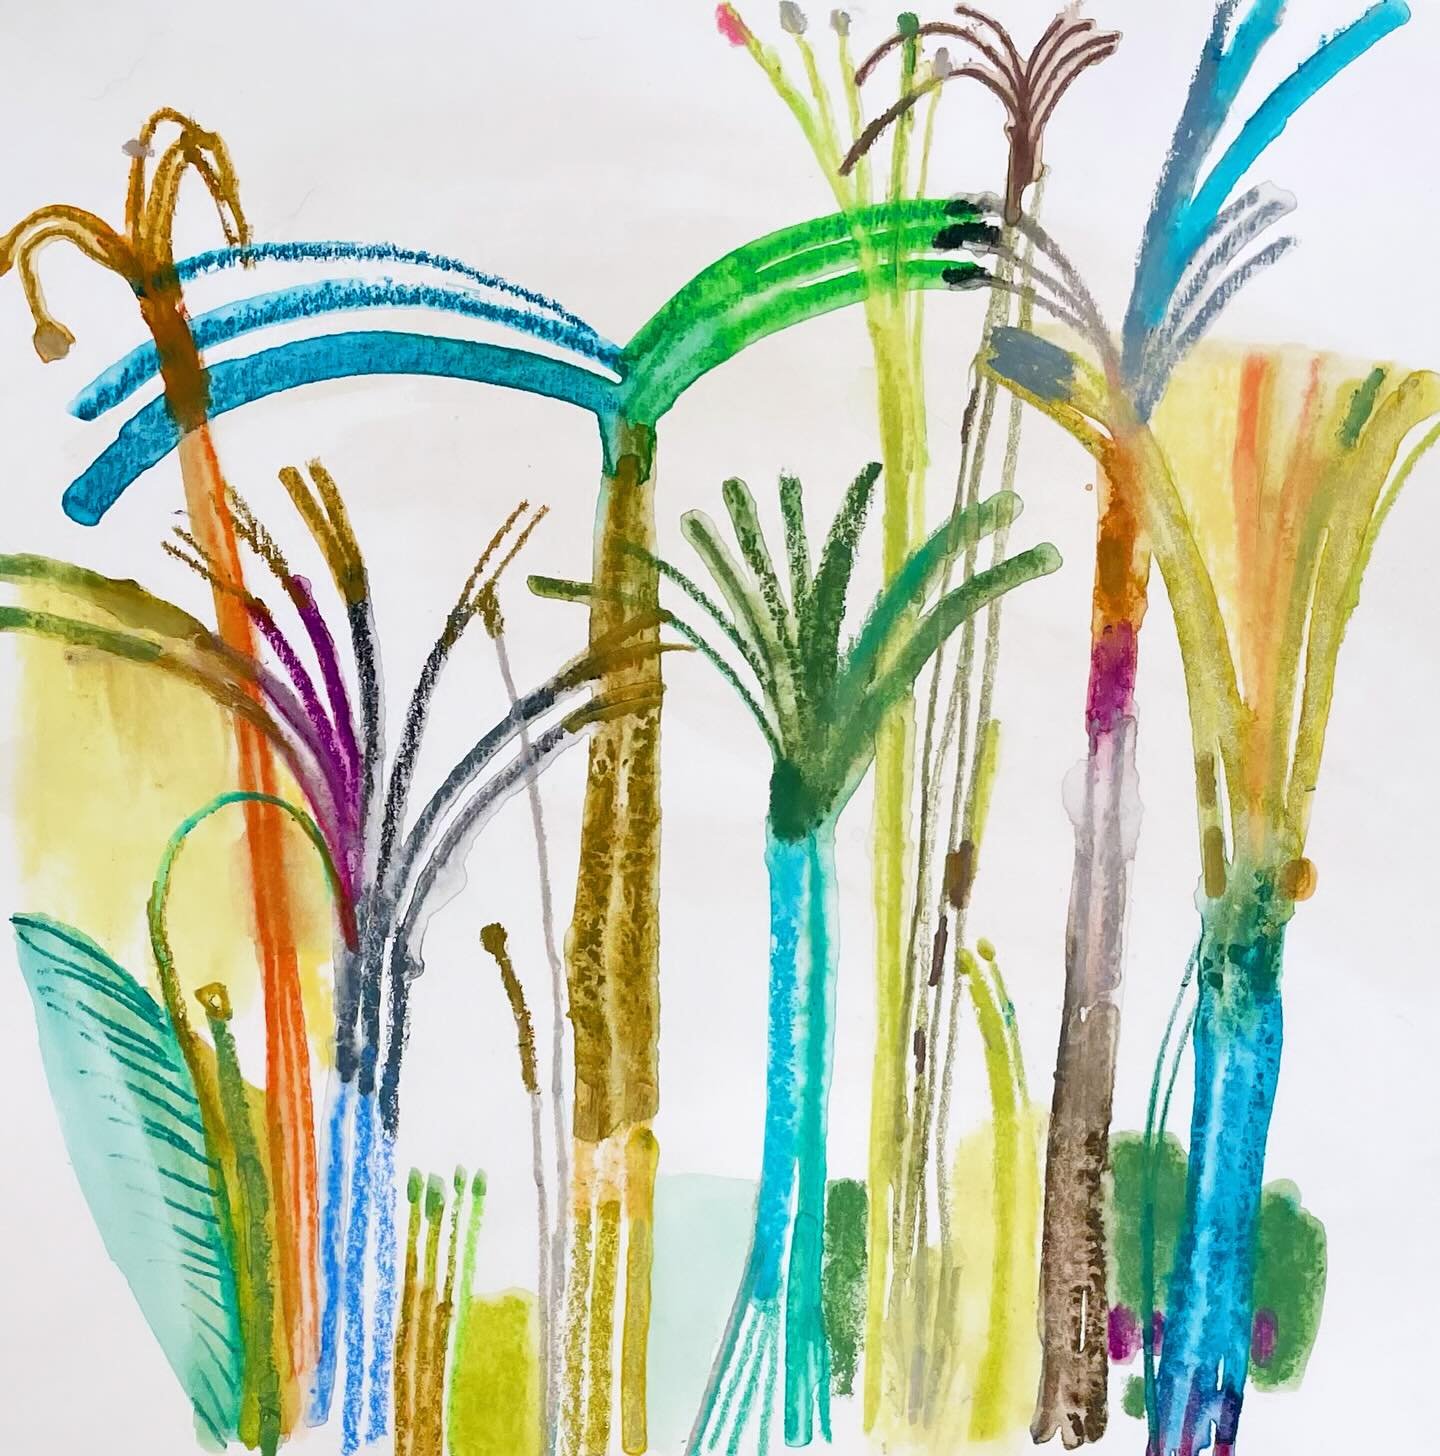 Today&rsquo;s post: abstract palm trees. 
#palms #palmtrees #californiapalms #trees #treeofinstagram #treestagram #ilovetrees #abstracttrees #watercolorcrayons #watercolorart